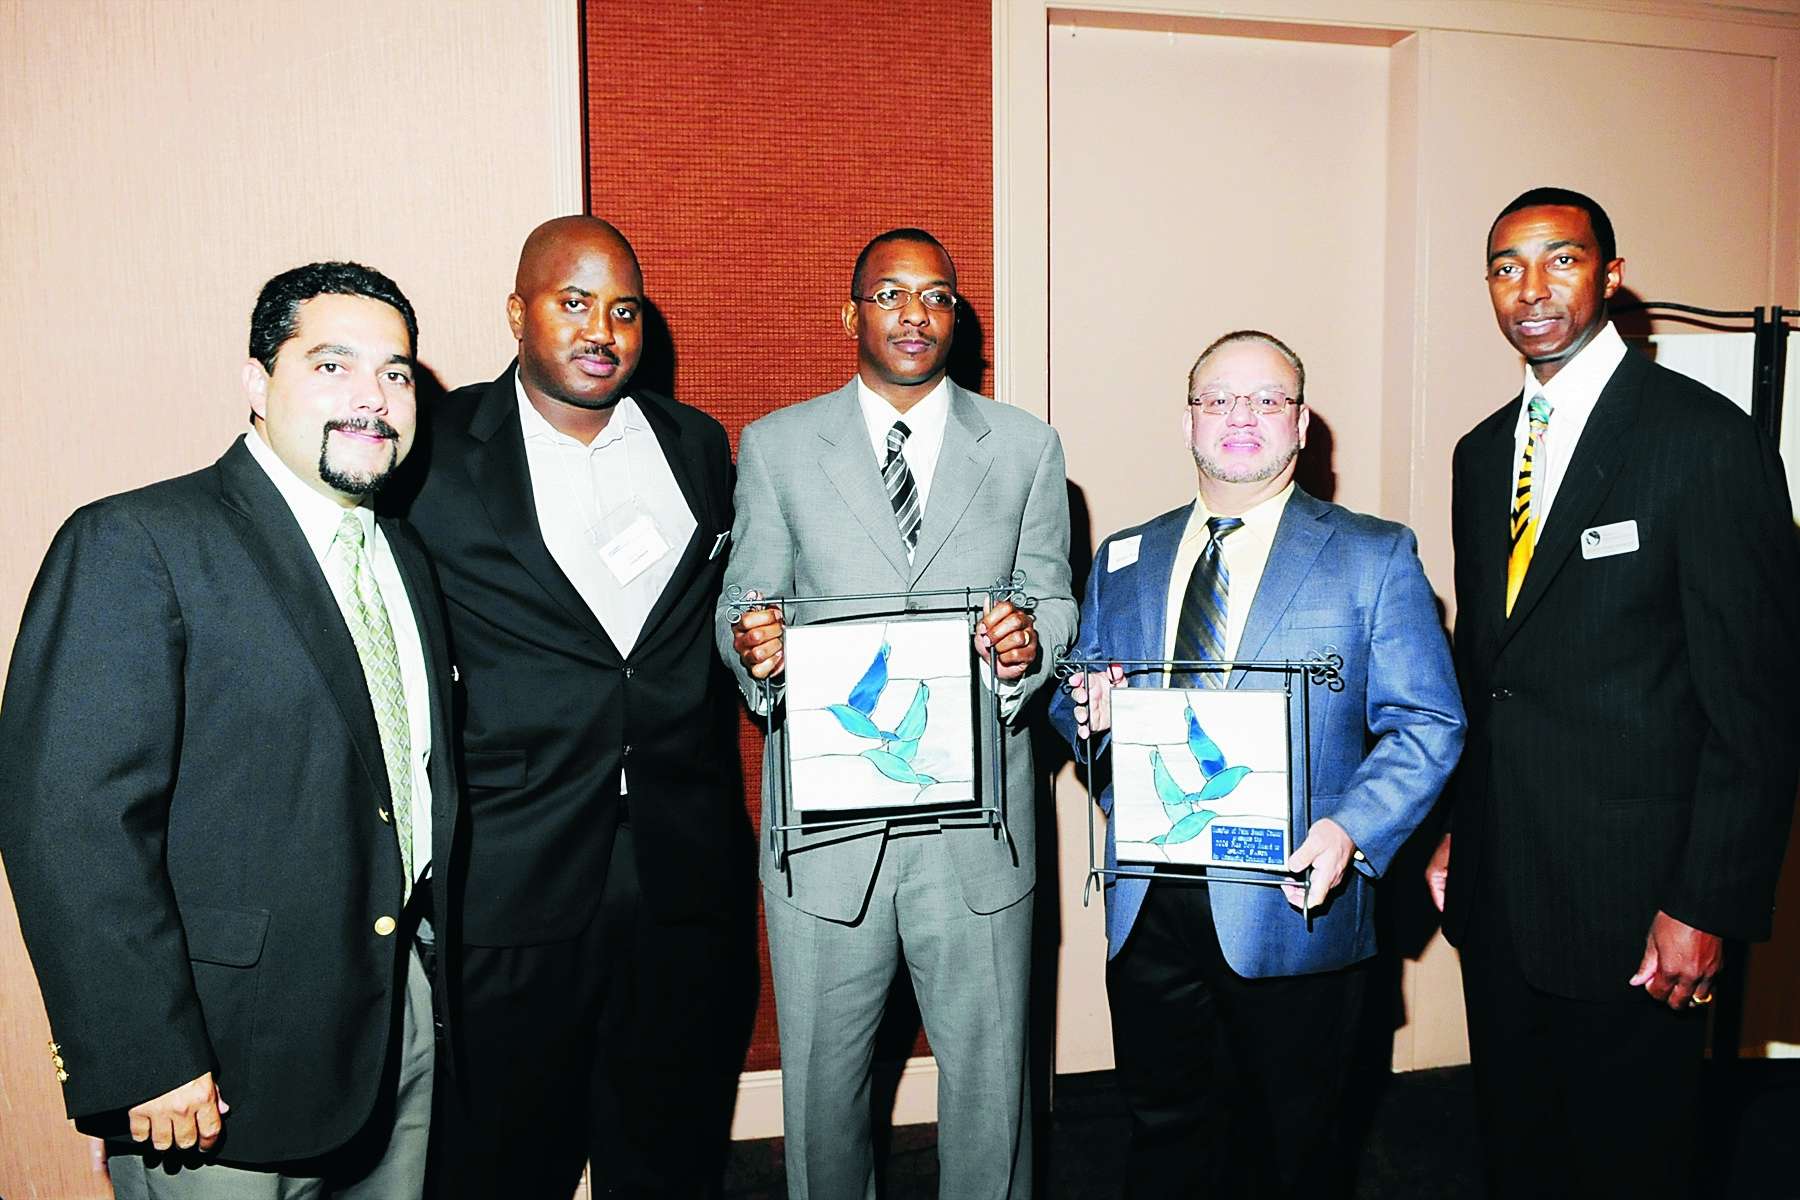 Layonel Lopez, Paul A. Nunnally, Derrick D. Berry, Israel Pabon, Bishop Oshea Granger, taking part in the Blue Dove Awards ceremony, presented by Hospice of Palm Beach County.